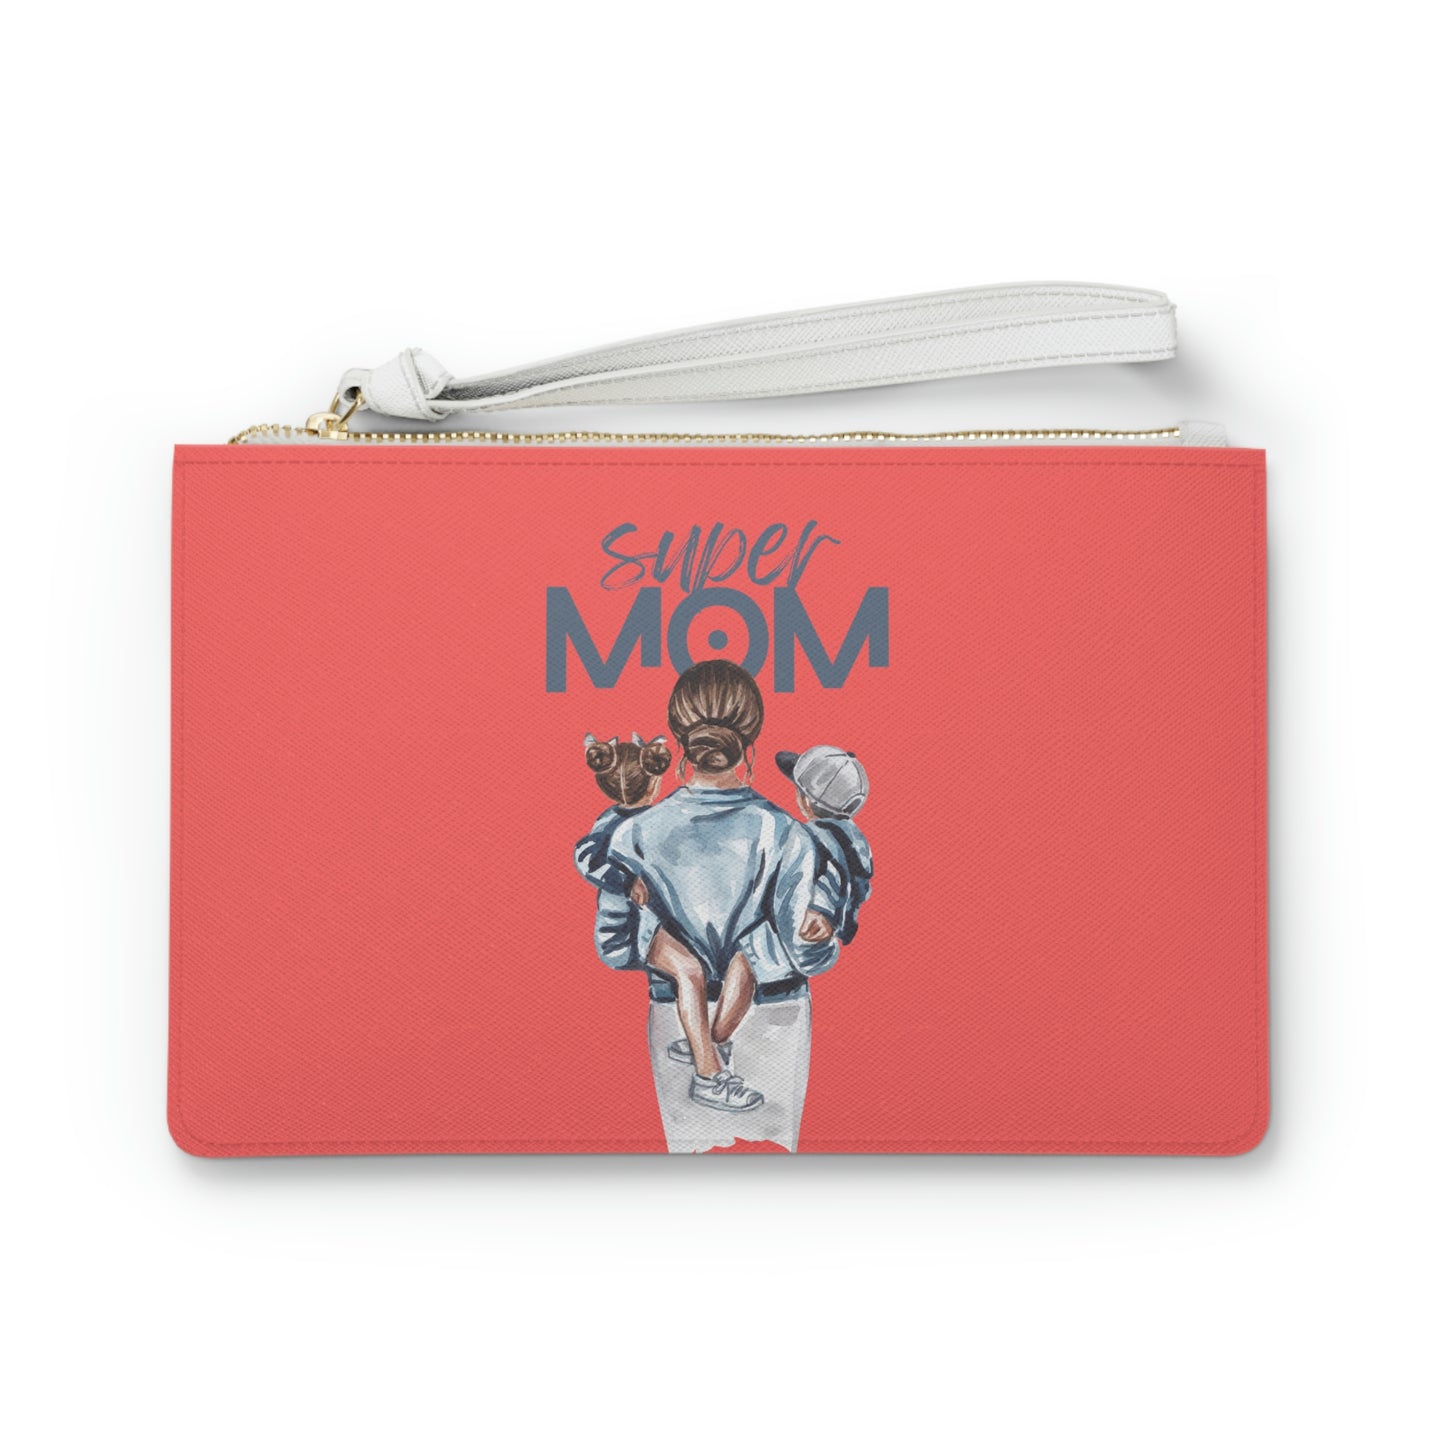 Super Mom Clutch Bag | BKLA | Shoes & Accessories | shoes, hats, phone covers, tote bags, clutch bags